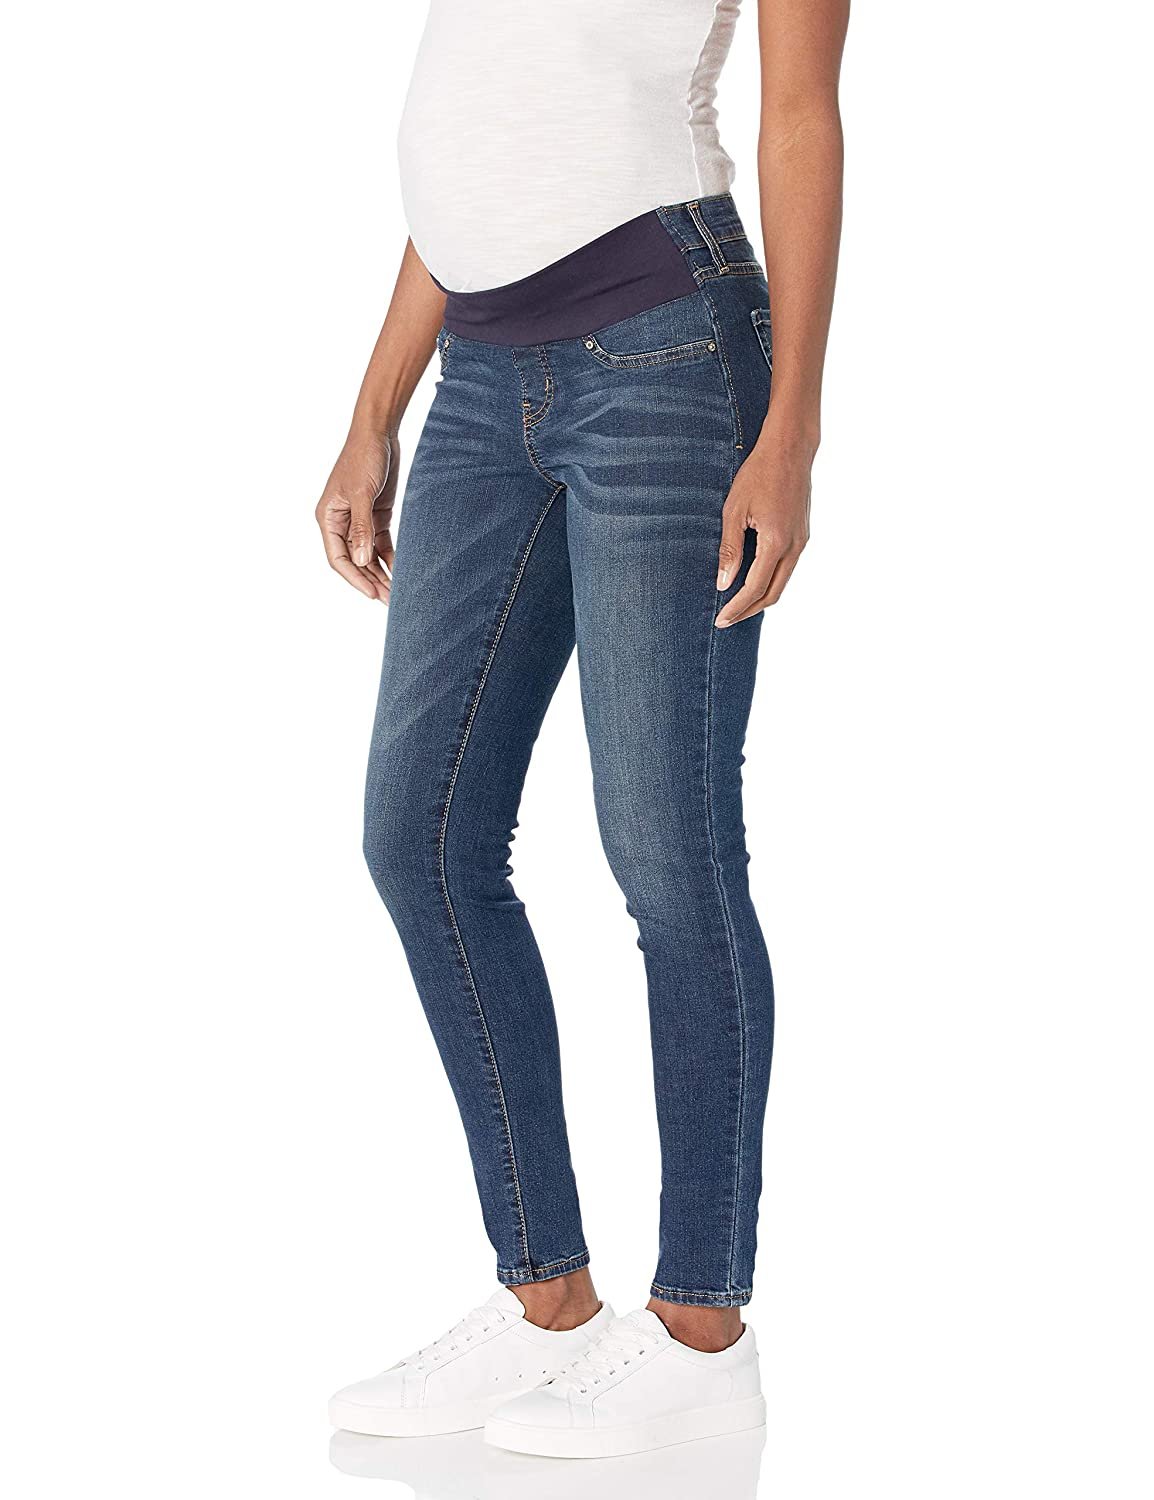 5. Signature by Levi Strauss & Co. Gold Label Women's Maternity Skinny Jeans 